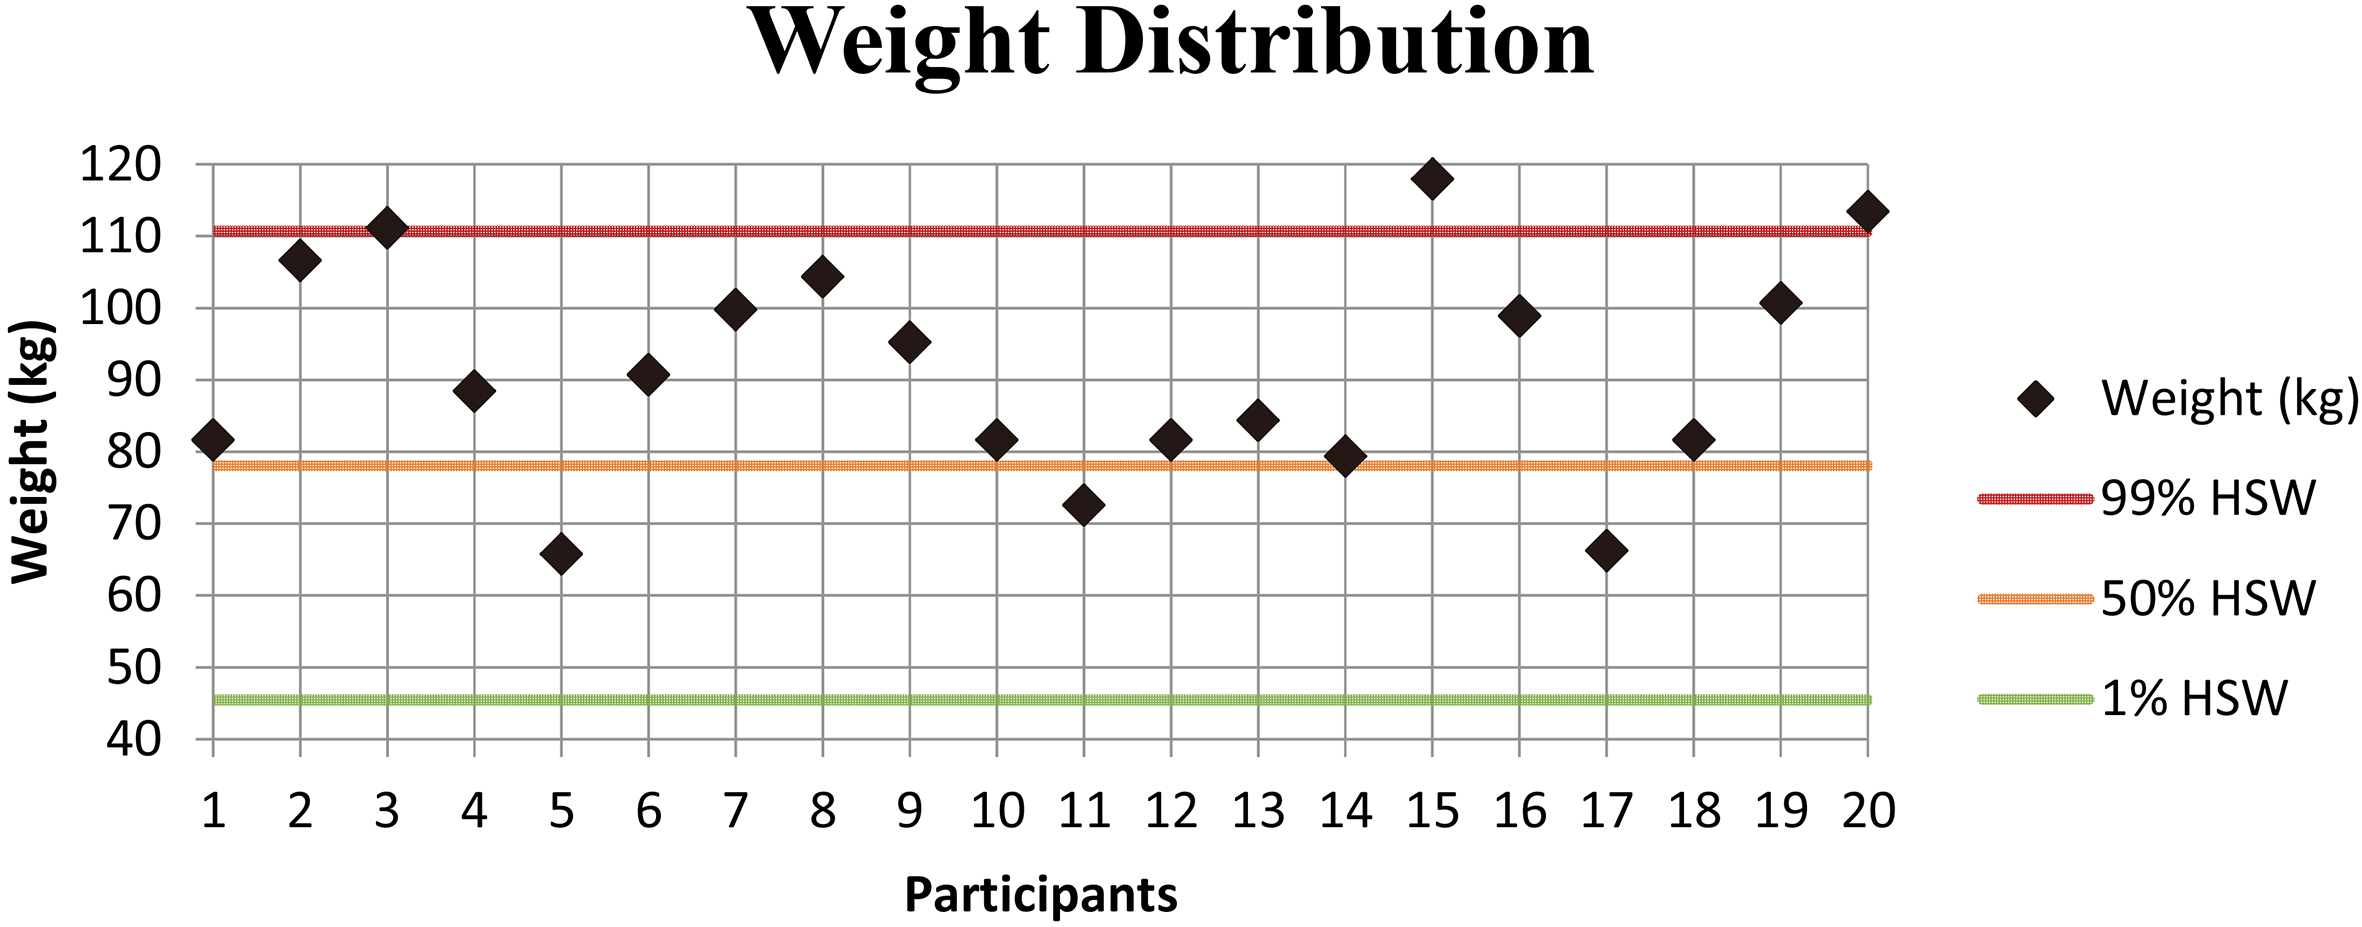 Weight distribution of the participants. Weight of all the participants compared to “The measure of man and woman” [20] where the green line represent the 1st percentile of the population, the yellow line the 50th percentile and the red line the 99th percentile.